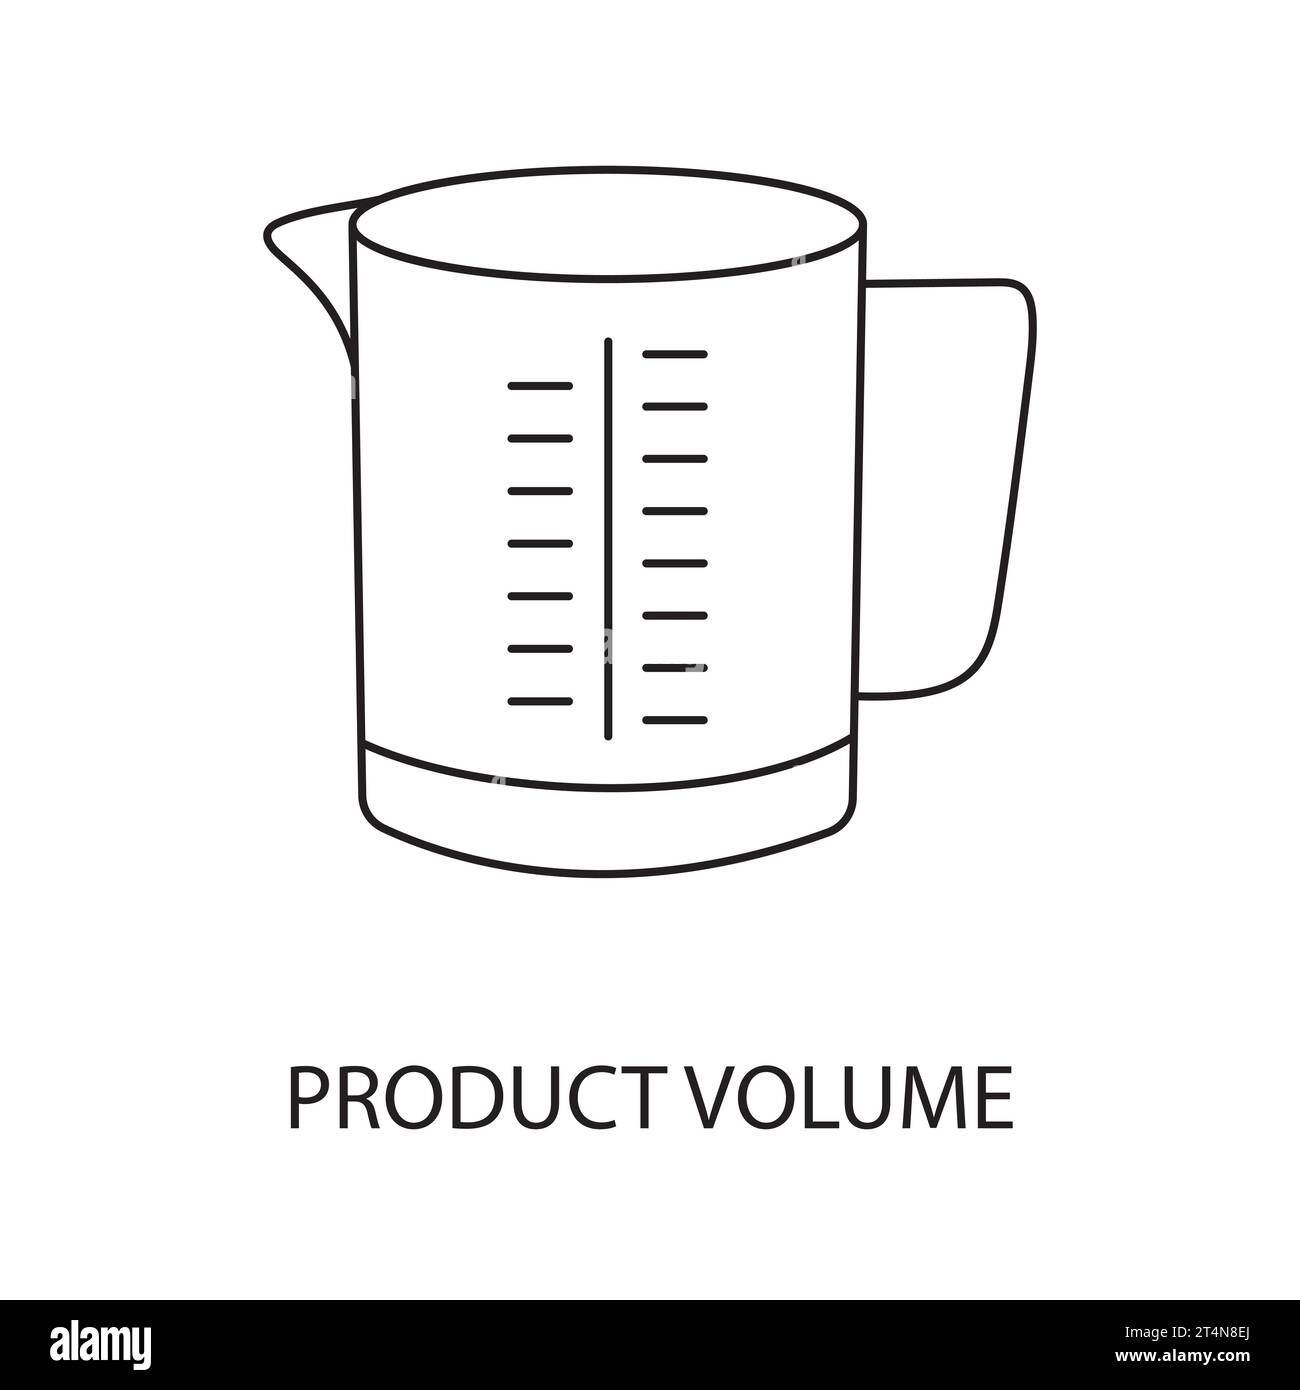 https://c8.alamy.com/comp/2T4N8EJ/product-volume-line-icon-vector-for-food-packaging-measuring-cup-2T4N8EJ.jpg